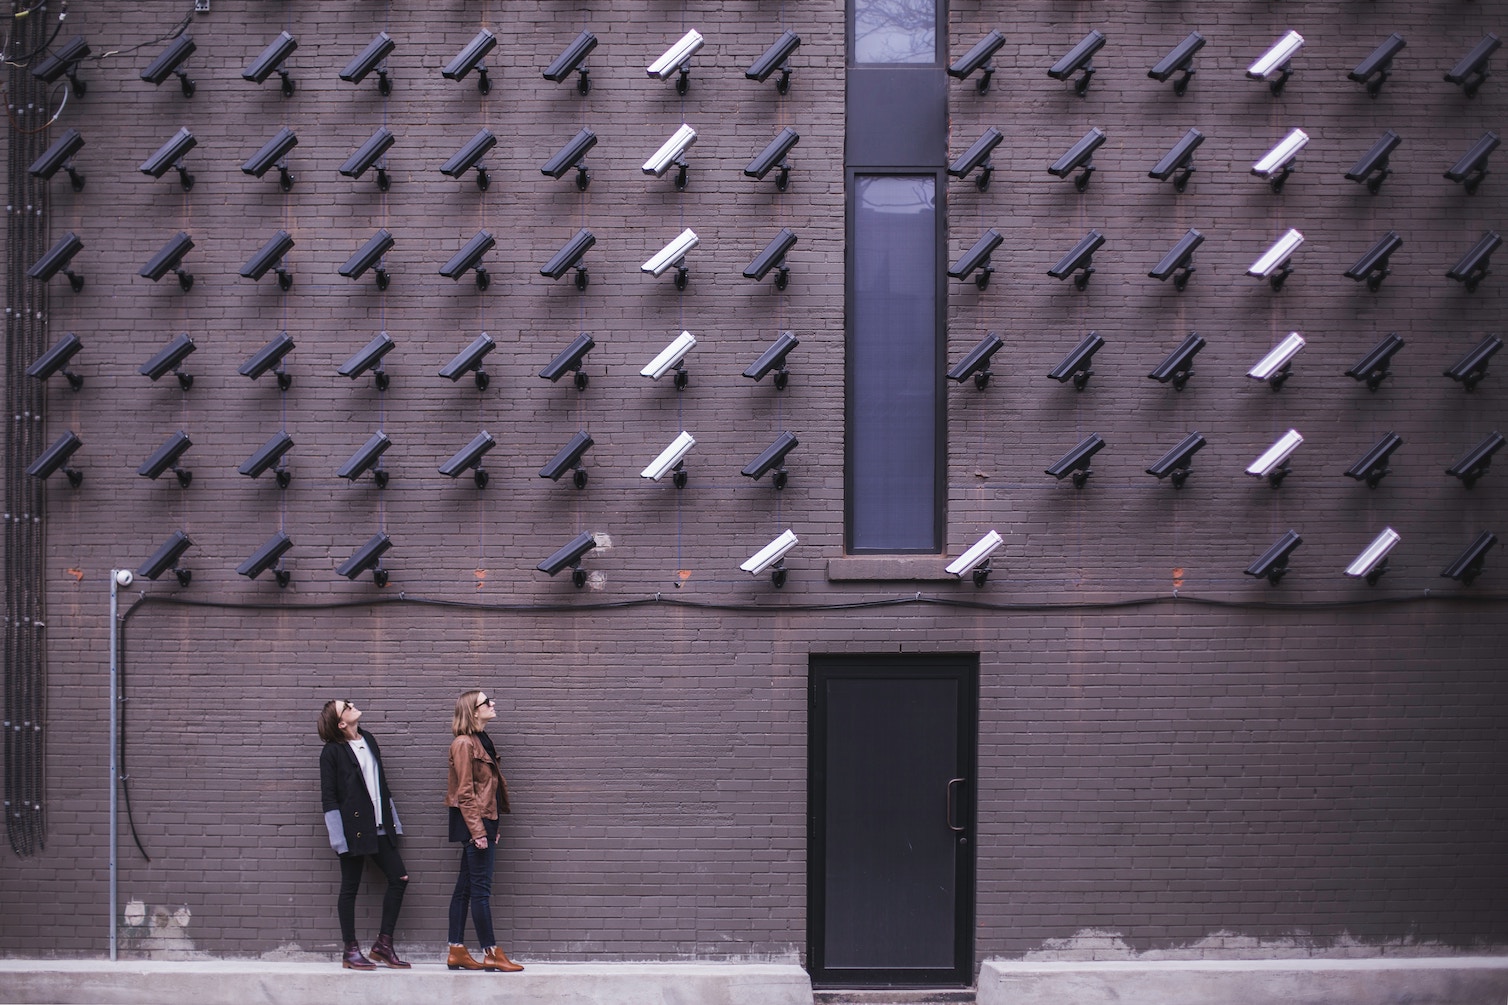 two women next to brick wall with CCTV surveillance cameras pointing at them